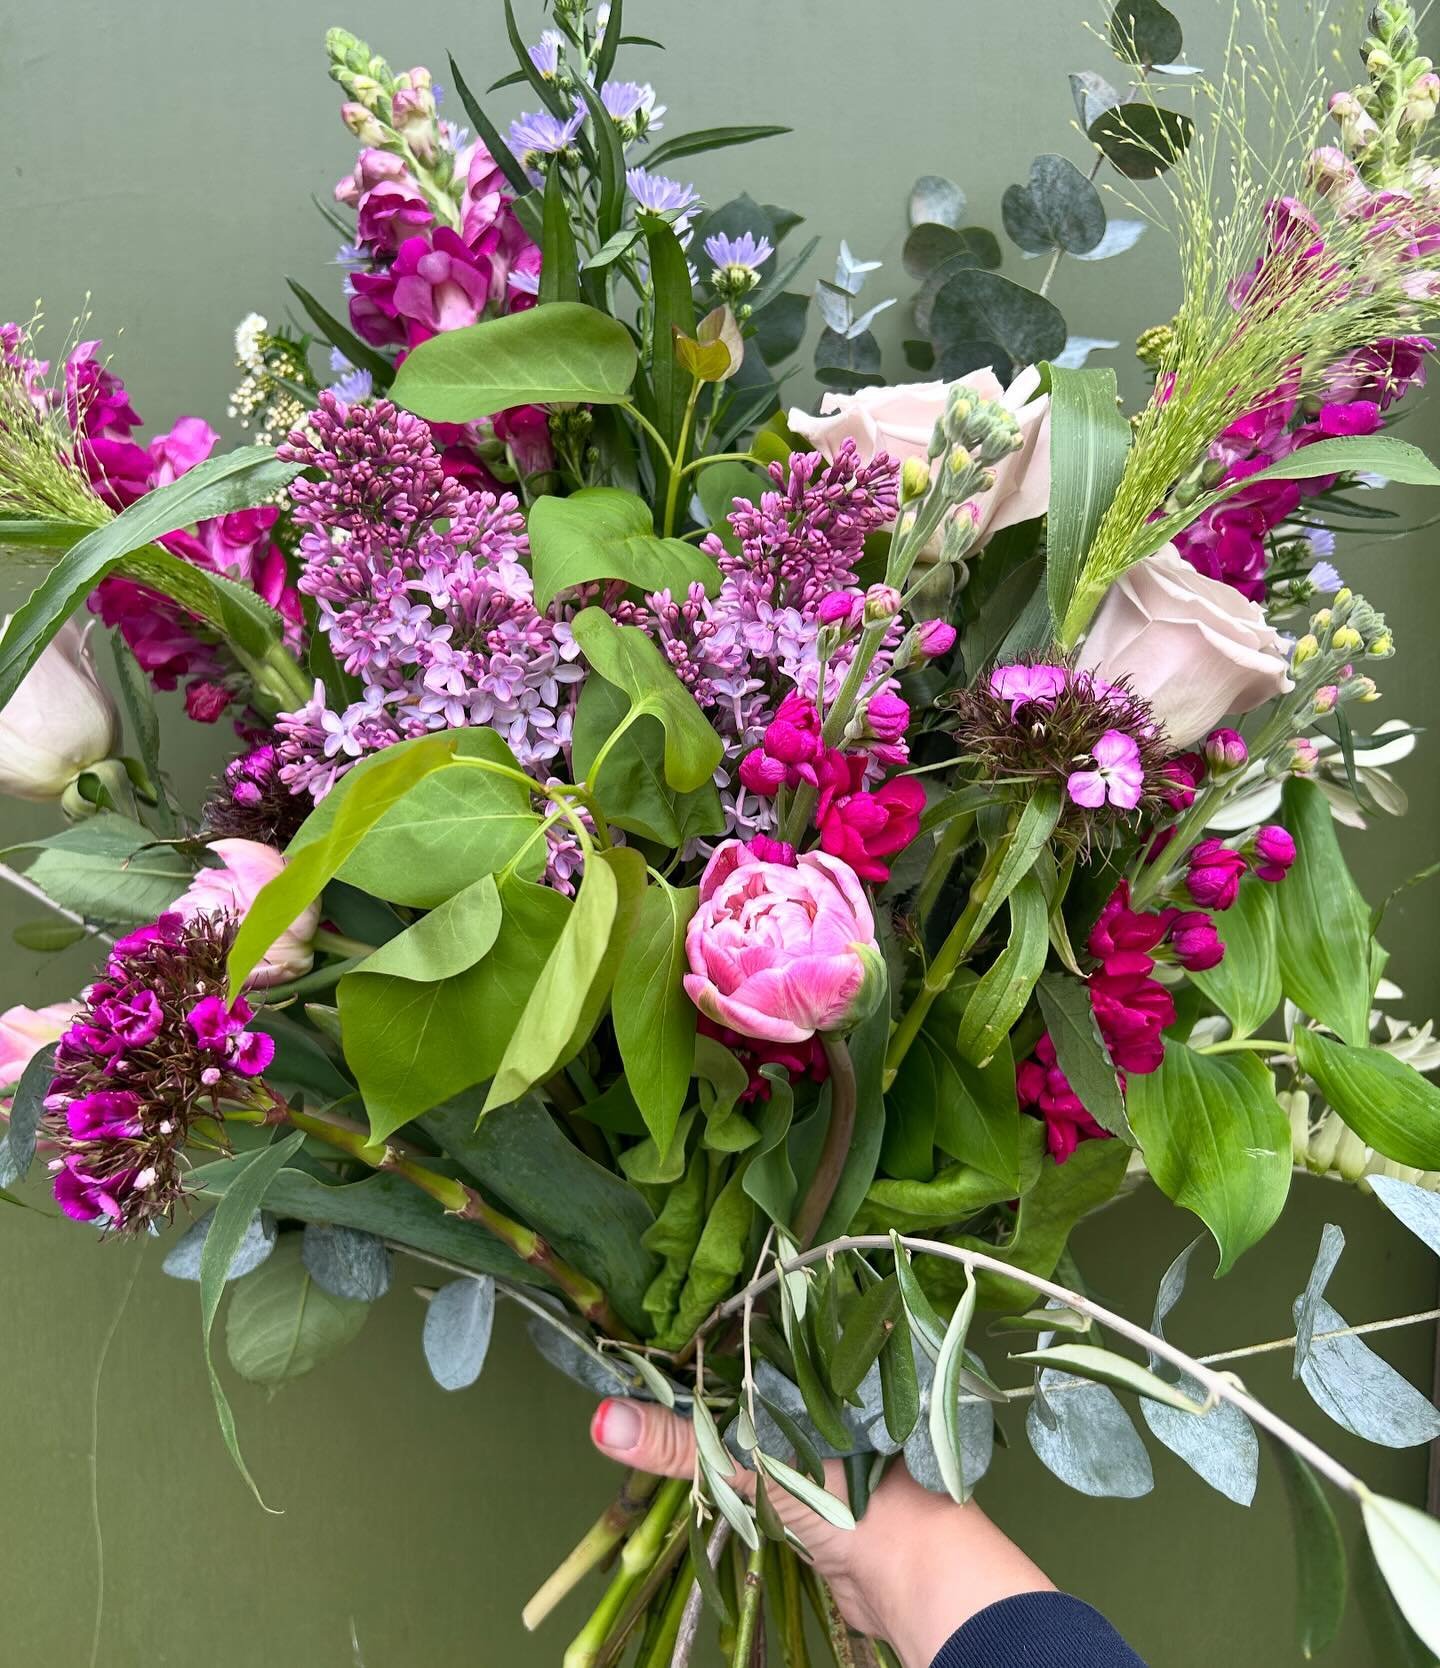 Introduction to floristry we are go!
5 days creating, playing, learning with delicious blooms!
This was Mondays colour choices 🙌
Tomorrow we create our wedding designs.. 
How was your Monday?? 🌱🌿